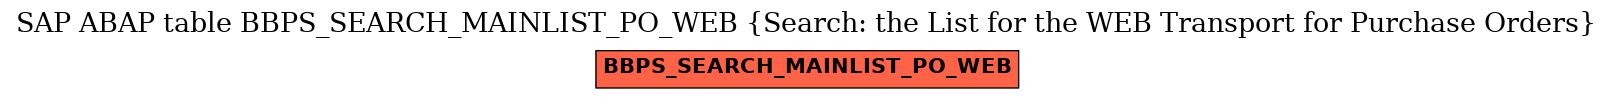 E-R Diagram for table BBPS_SEARCH_MAINLIST_PO_WEB (Search: the List for the WEB Transport for Purchase Orders)